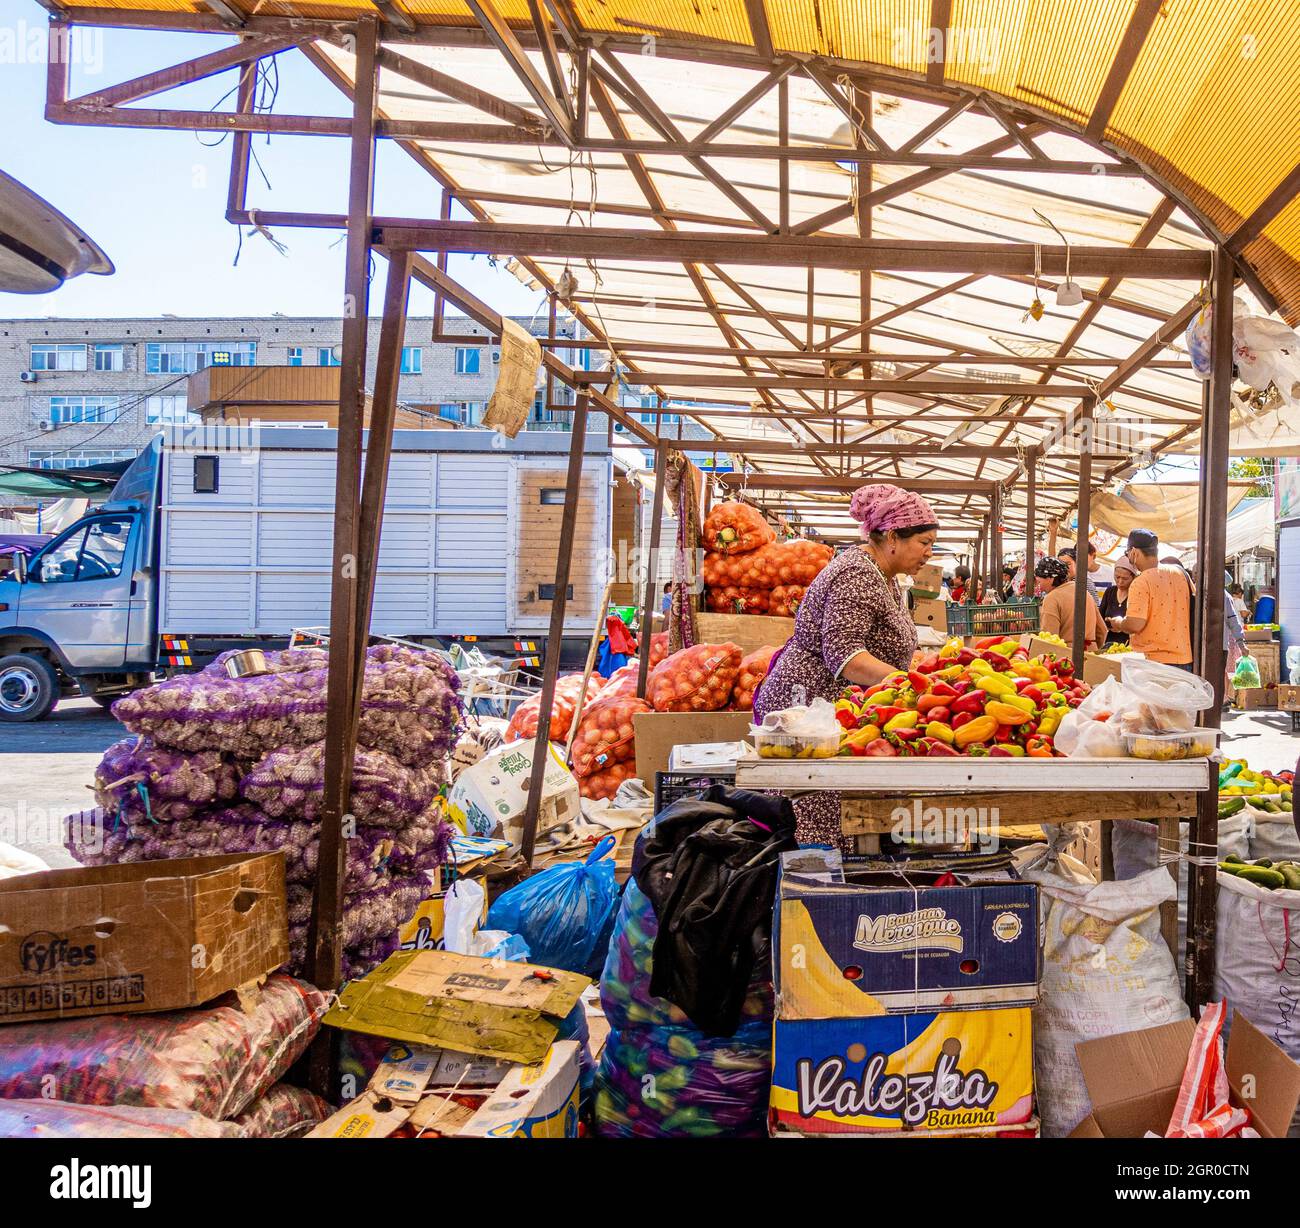 Woman selling vegetables at the stall on streetmarket bazar bazaar in Kyzyl-Orda, Kazakhstan, Central Asia Stock Photo